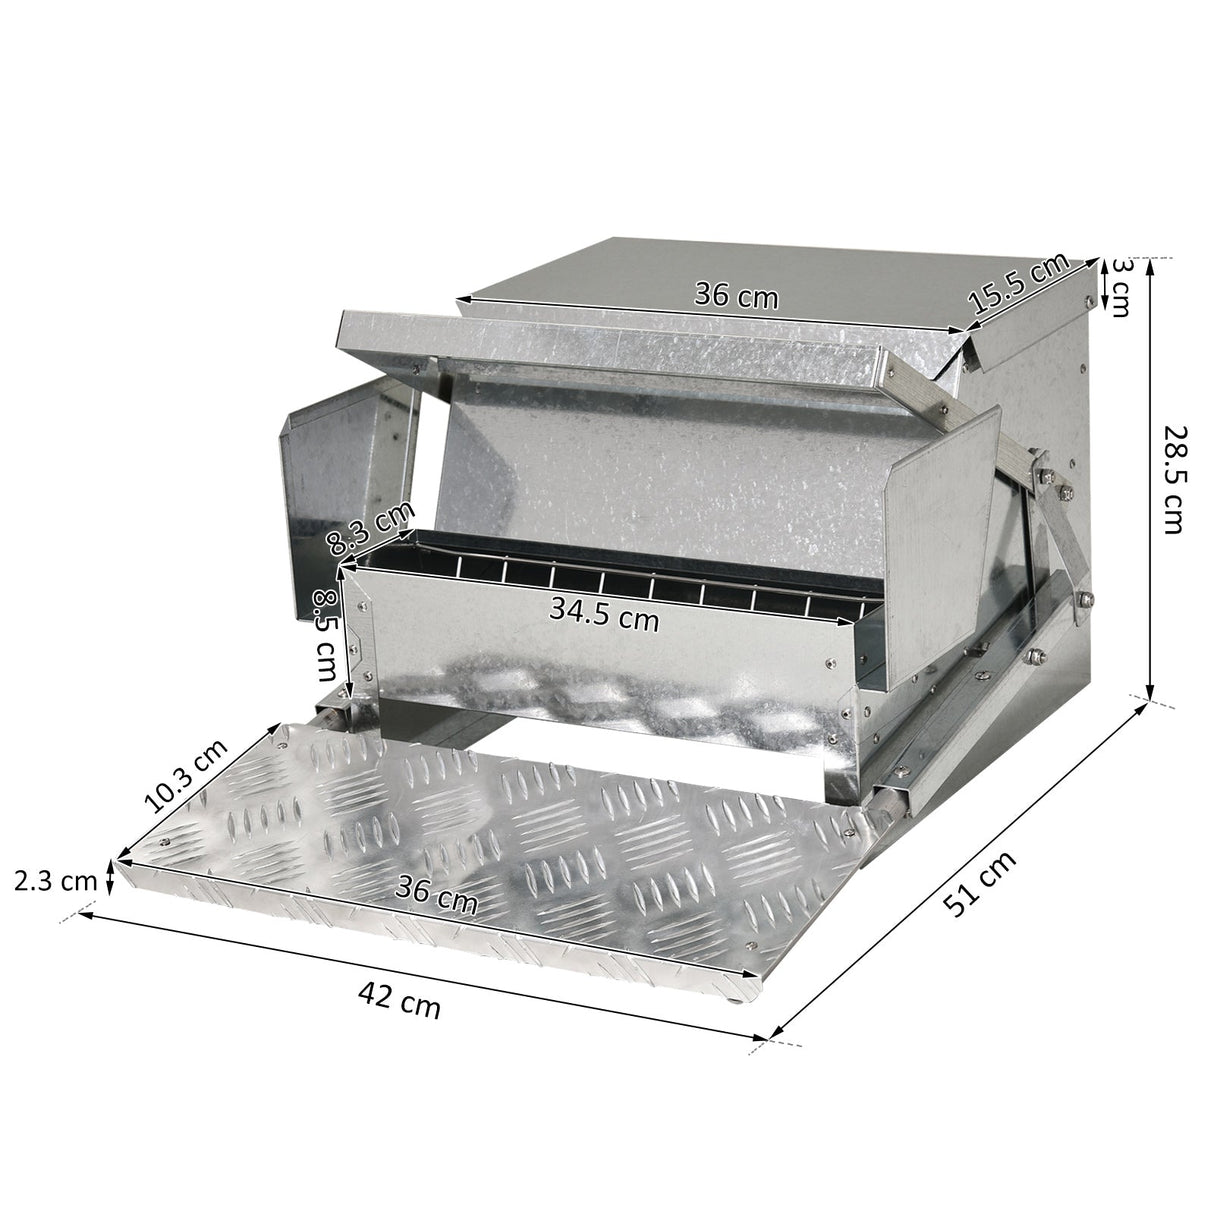 11.5KG Automatic Chicken Poultry Feeder Rat Proof Treadle Self Opening with Galvanized Steel and Aluminium, PawHut,